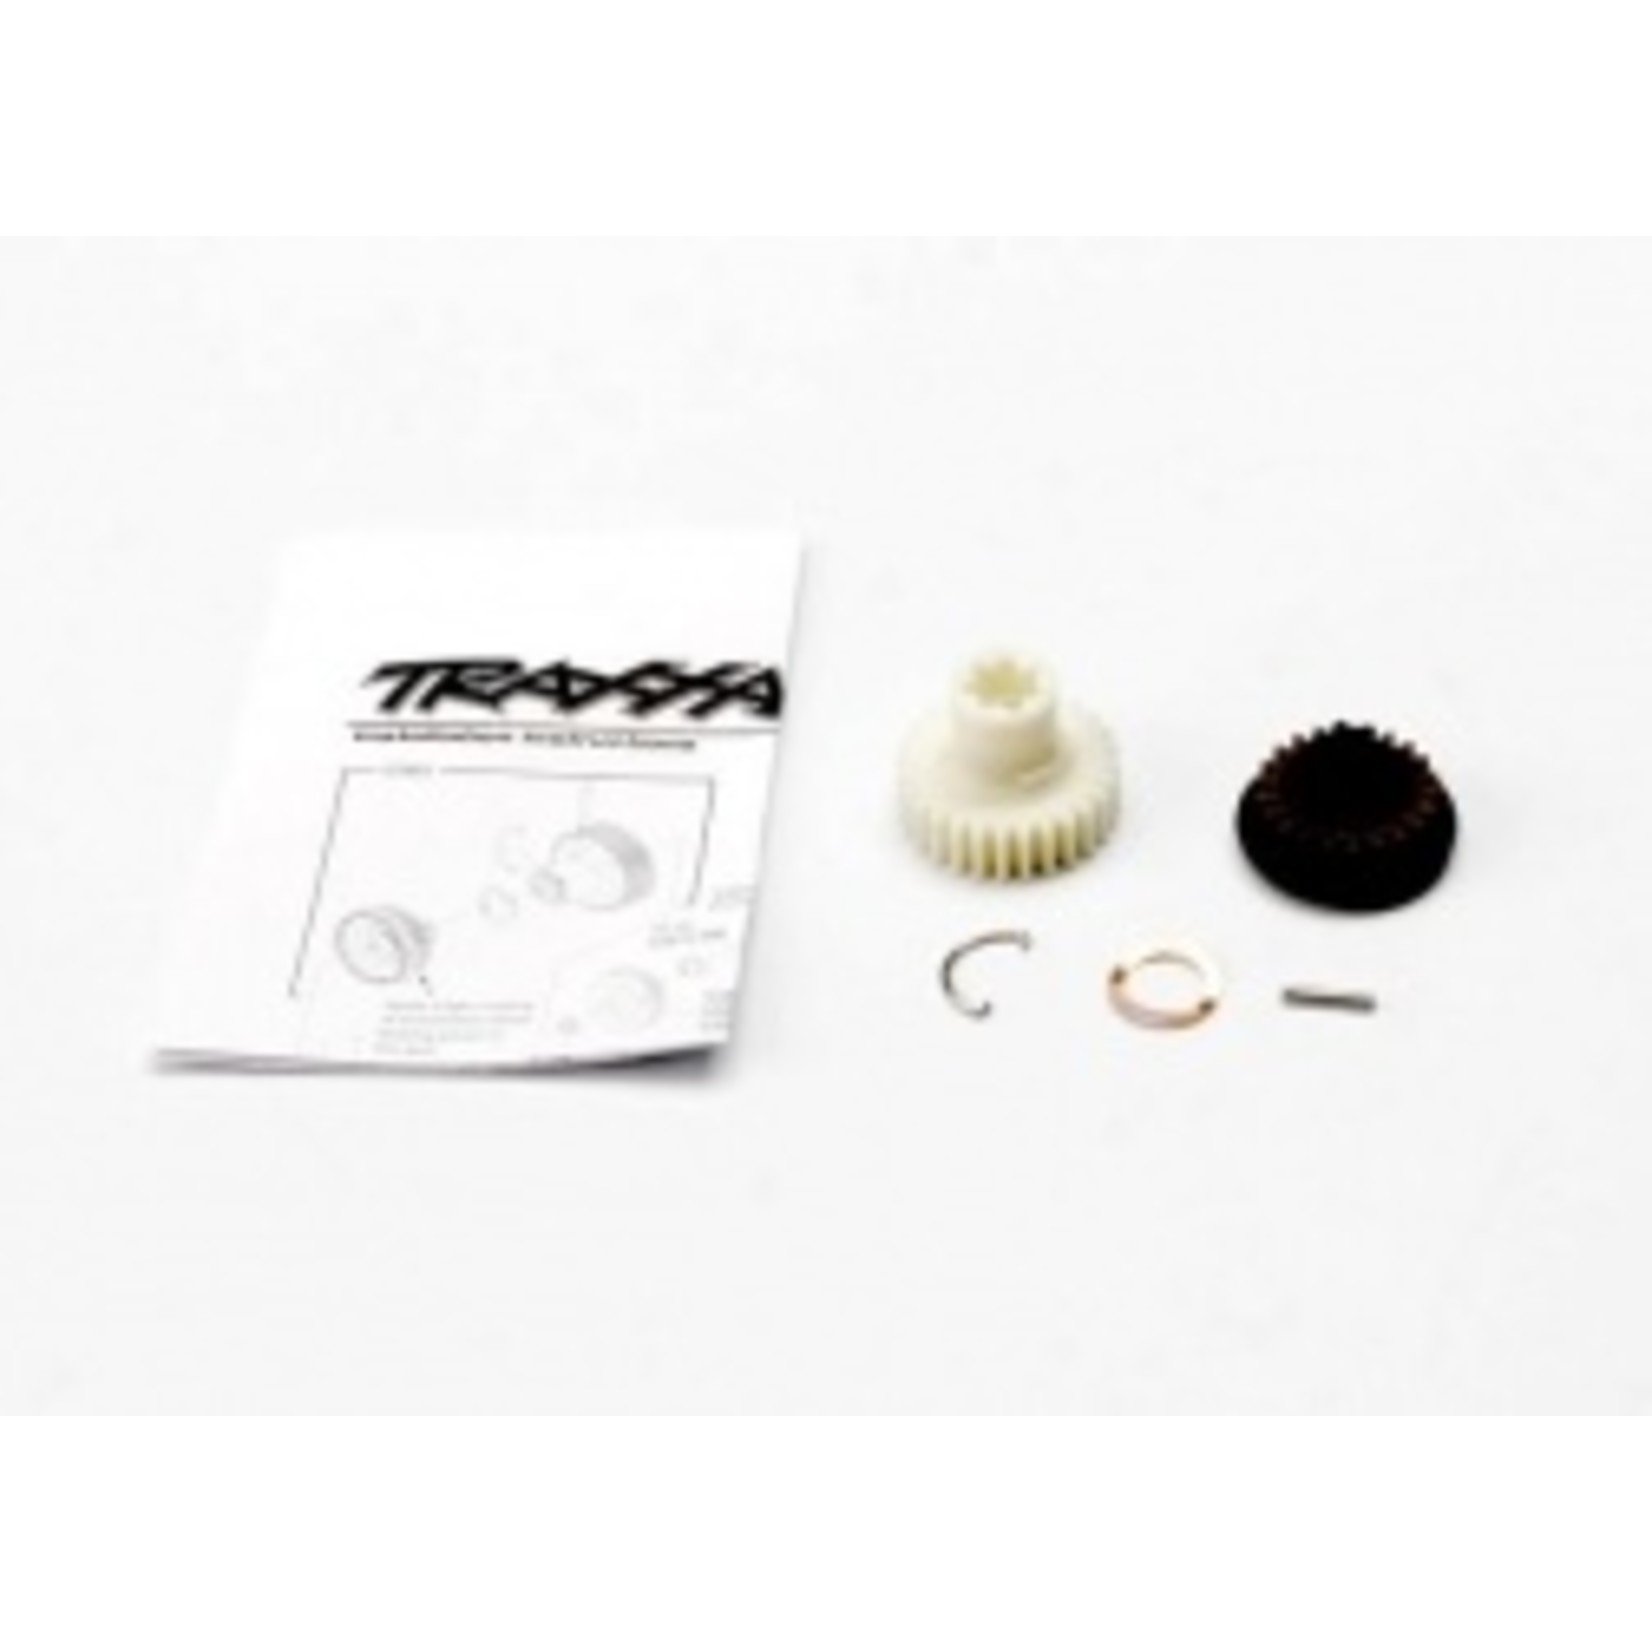 Traxxas Primary gears, forward and reverse/ 2x11.8mm pin/ pin retainer/ disc spring